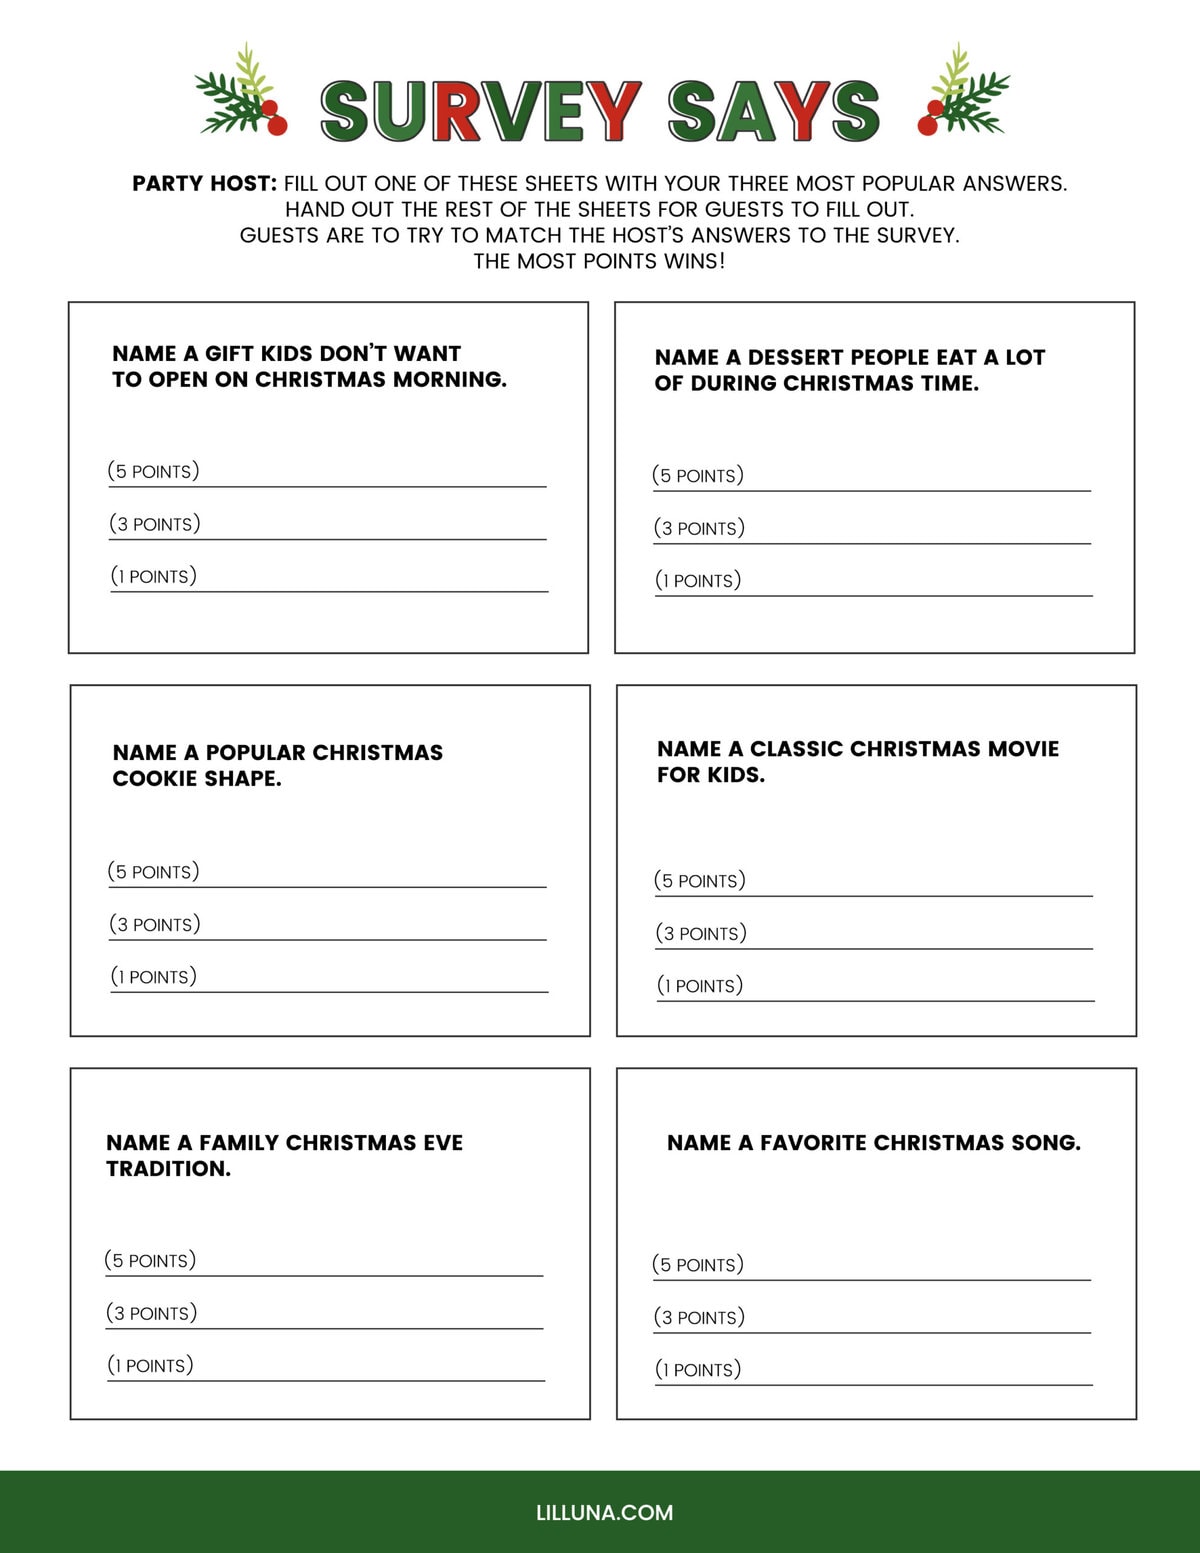 A picture of the survey says free printable Christmas game.